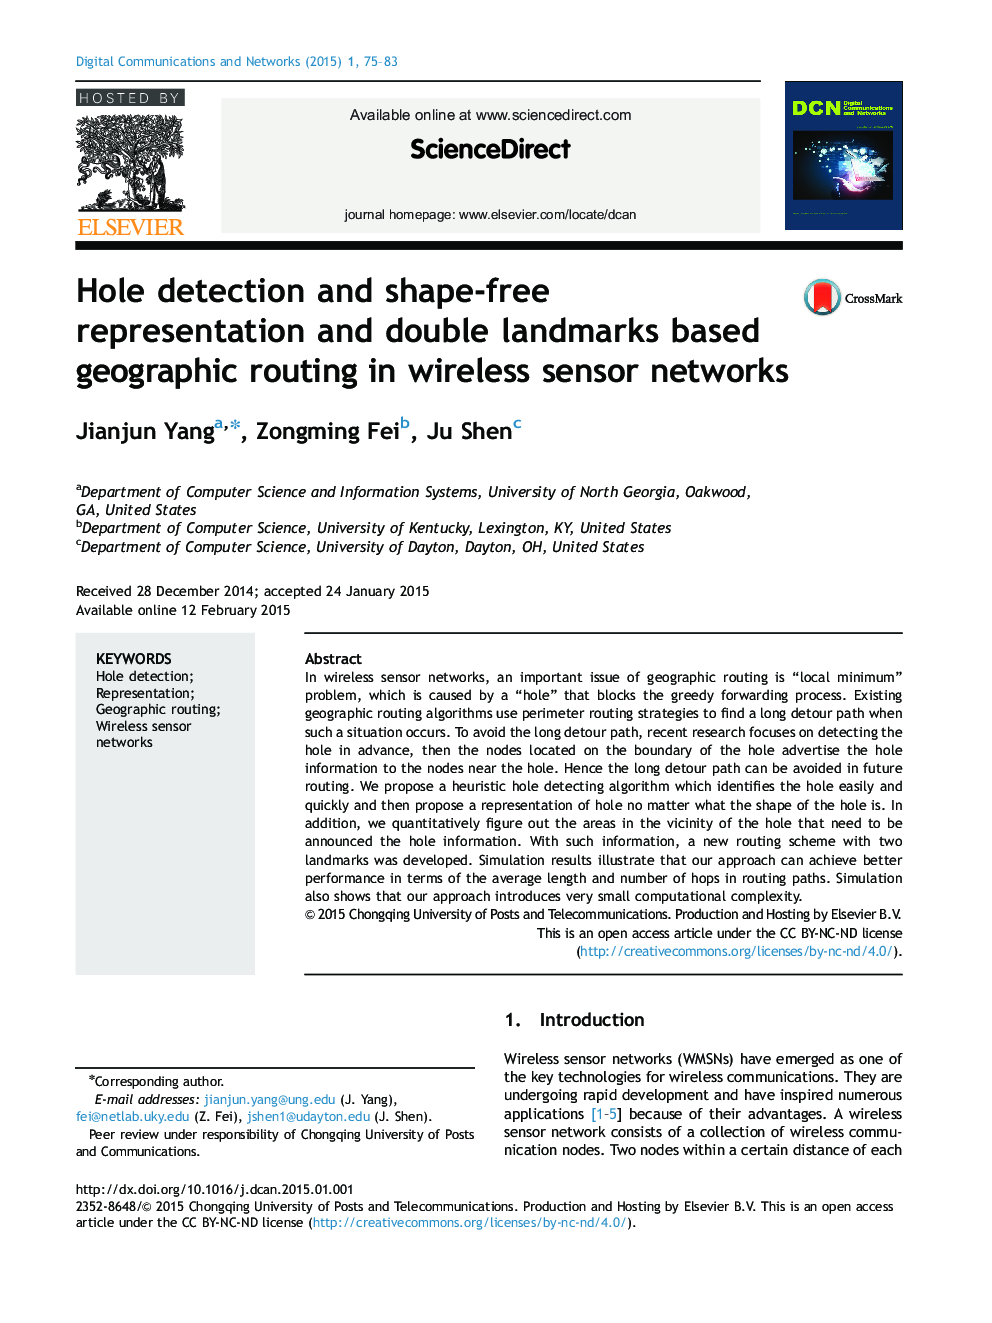 Hole detection and shape-free representation and double landmarks based geographic routing in wireless sensor networks 